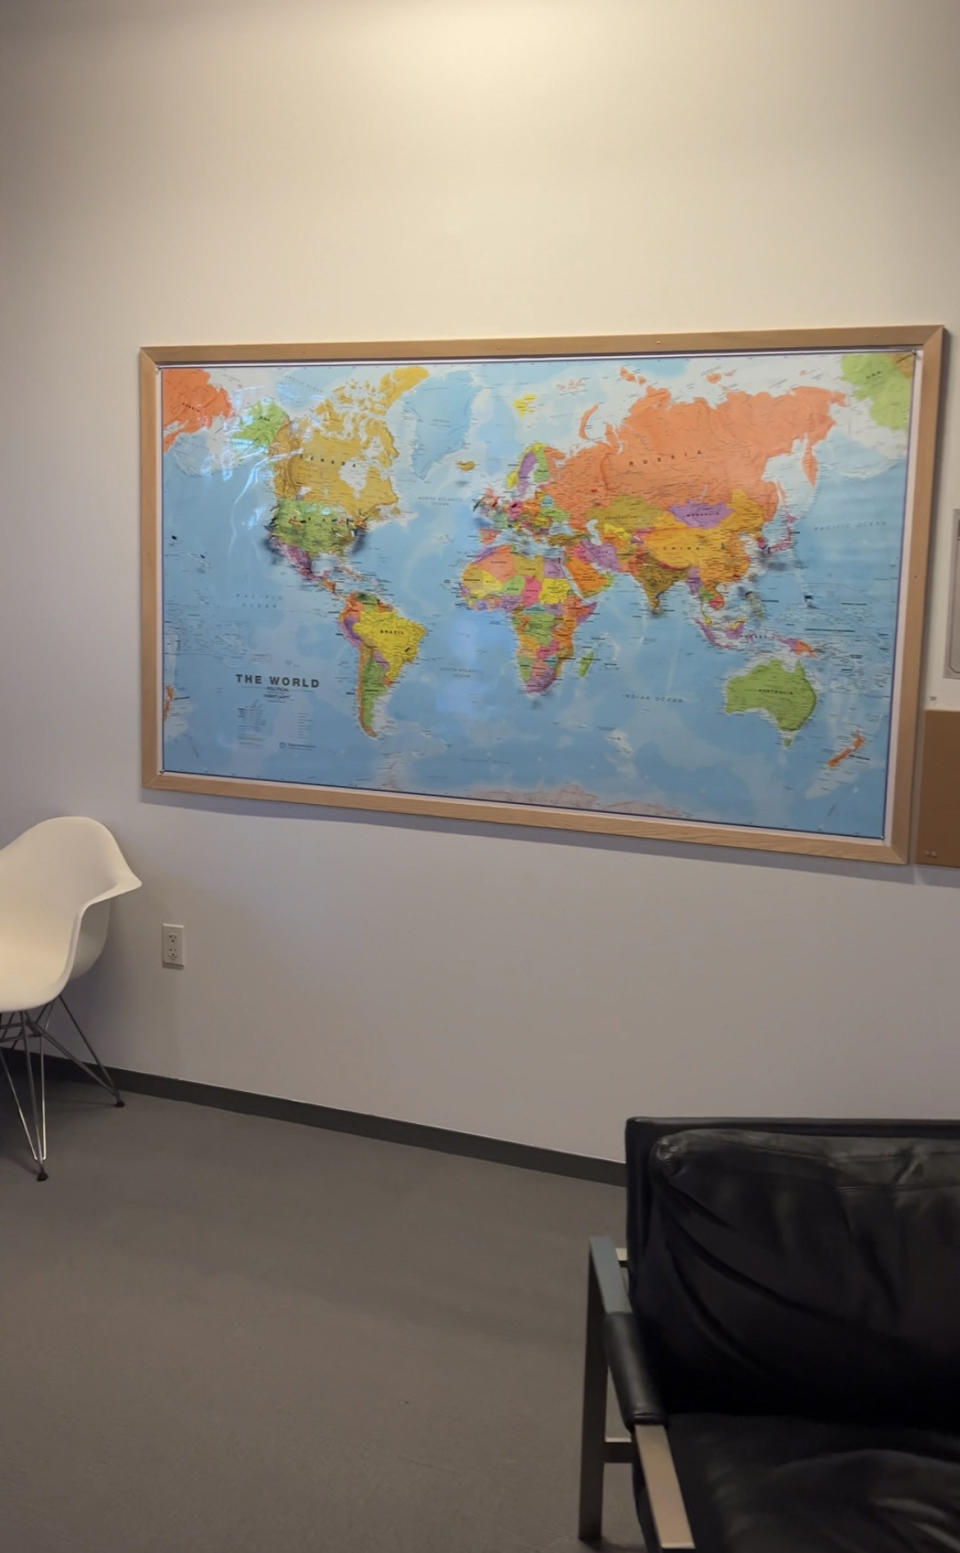 This map is filled with pins, which indicate the countries and islands the employees are from.